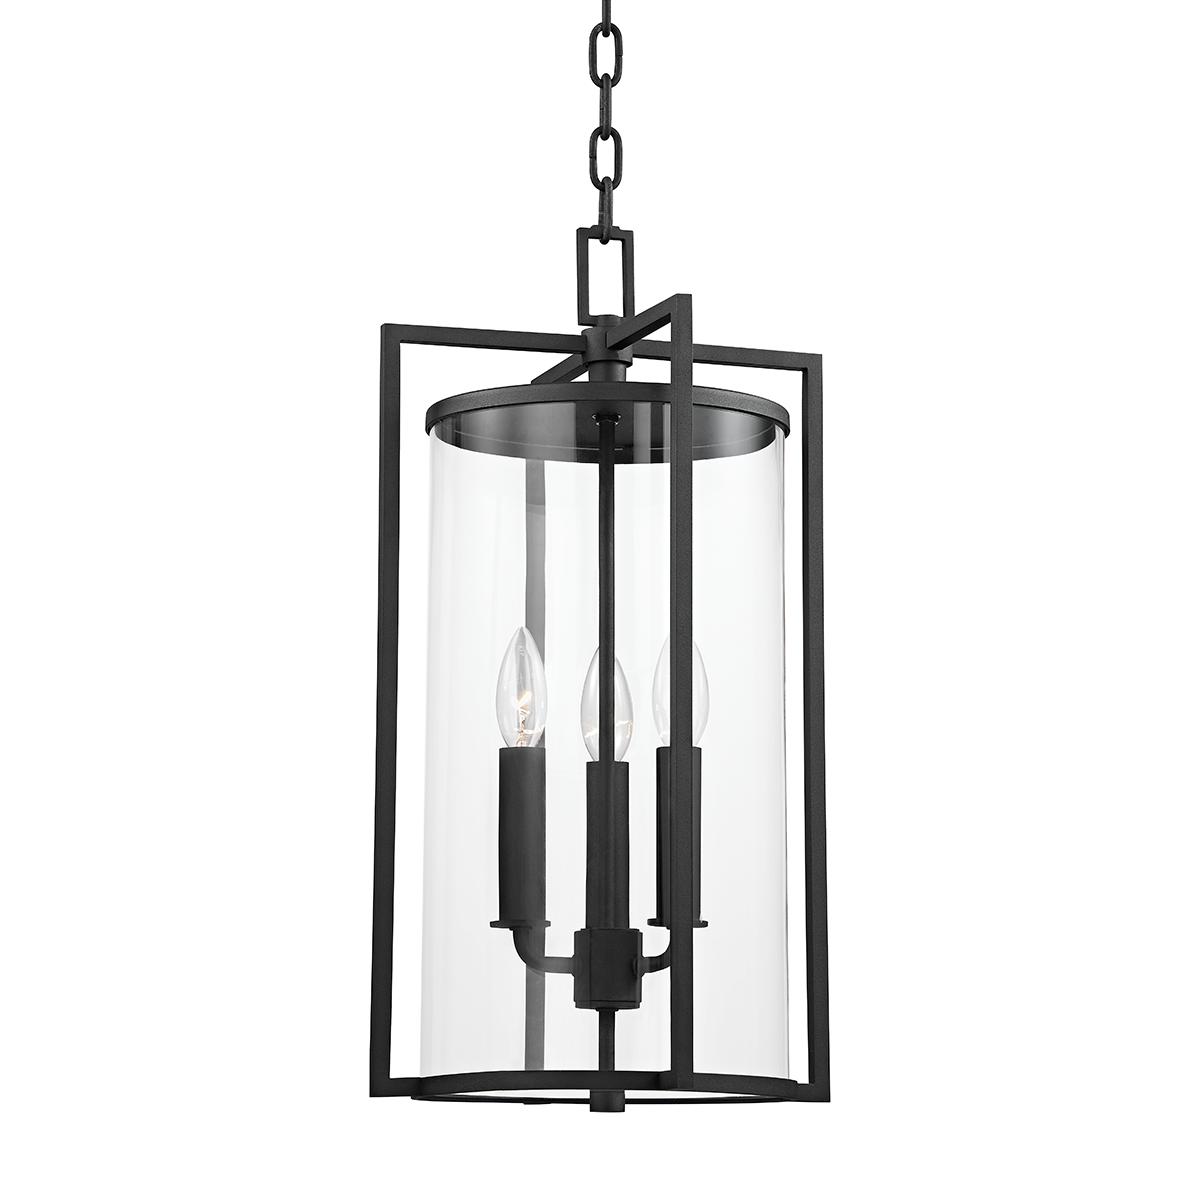 Troy PERCY 3 LIGHT EXTERIOR LANTERN F1146 Outdoor l Wall Troy Lighting   